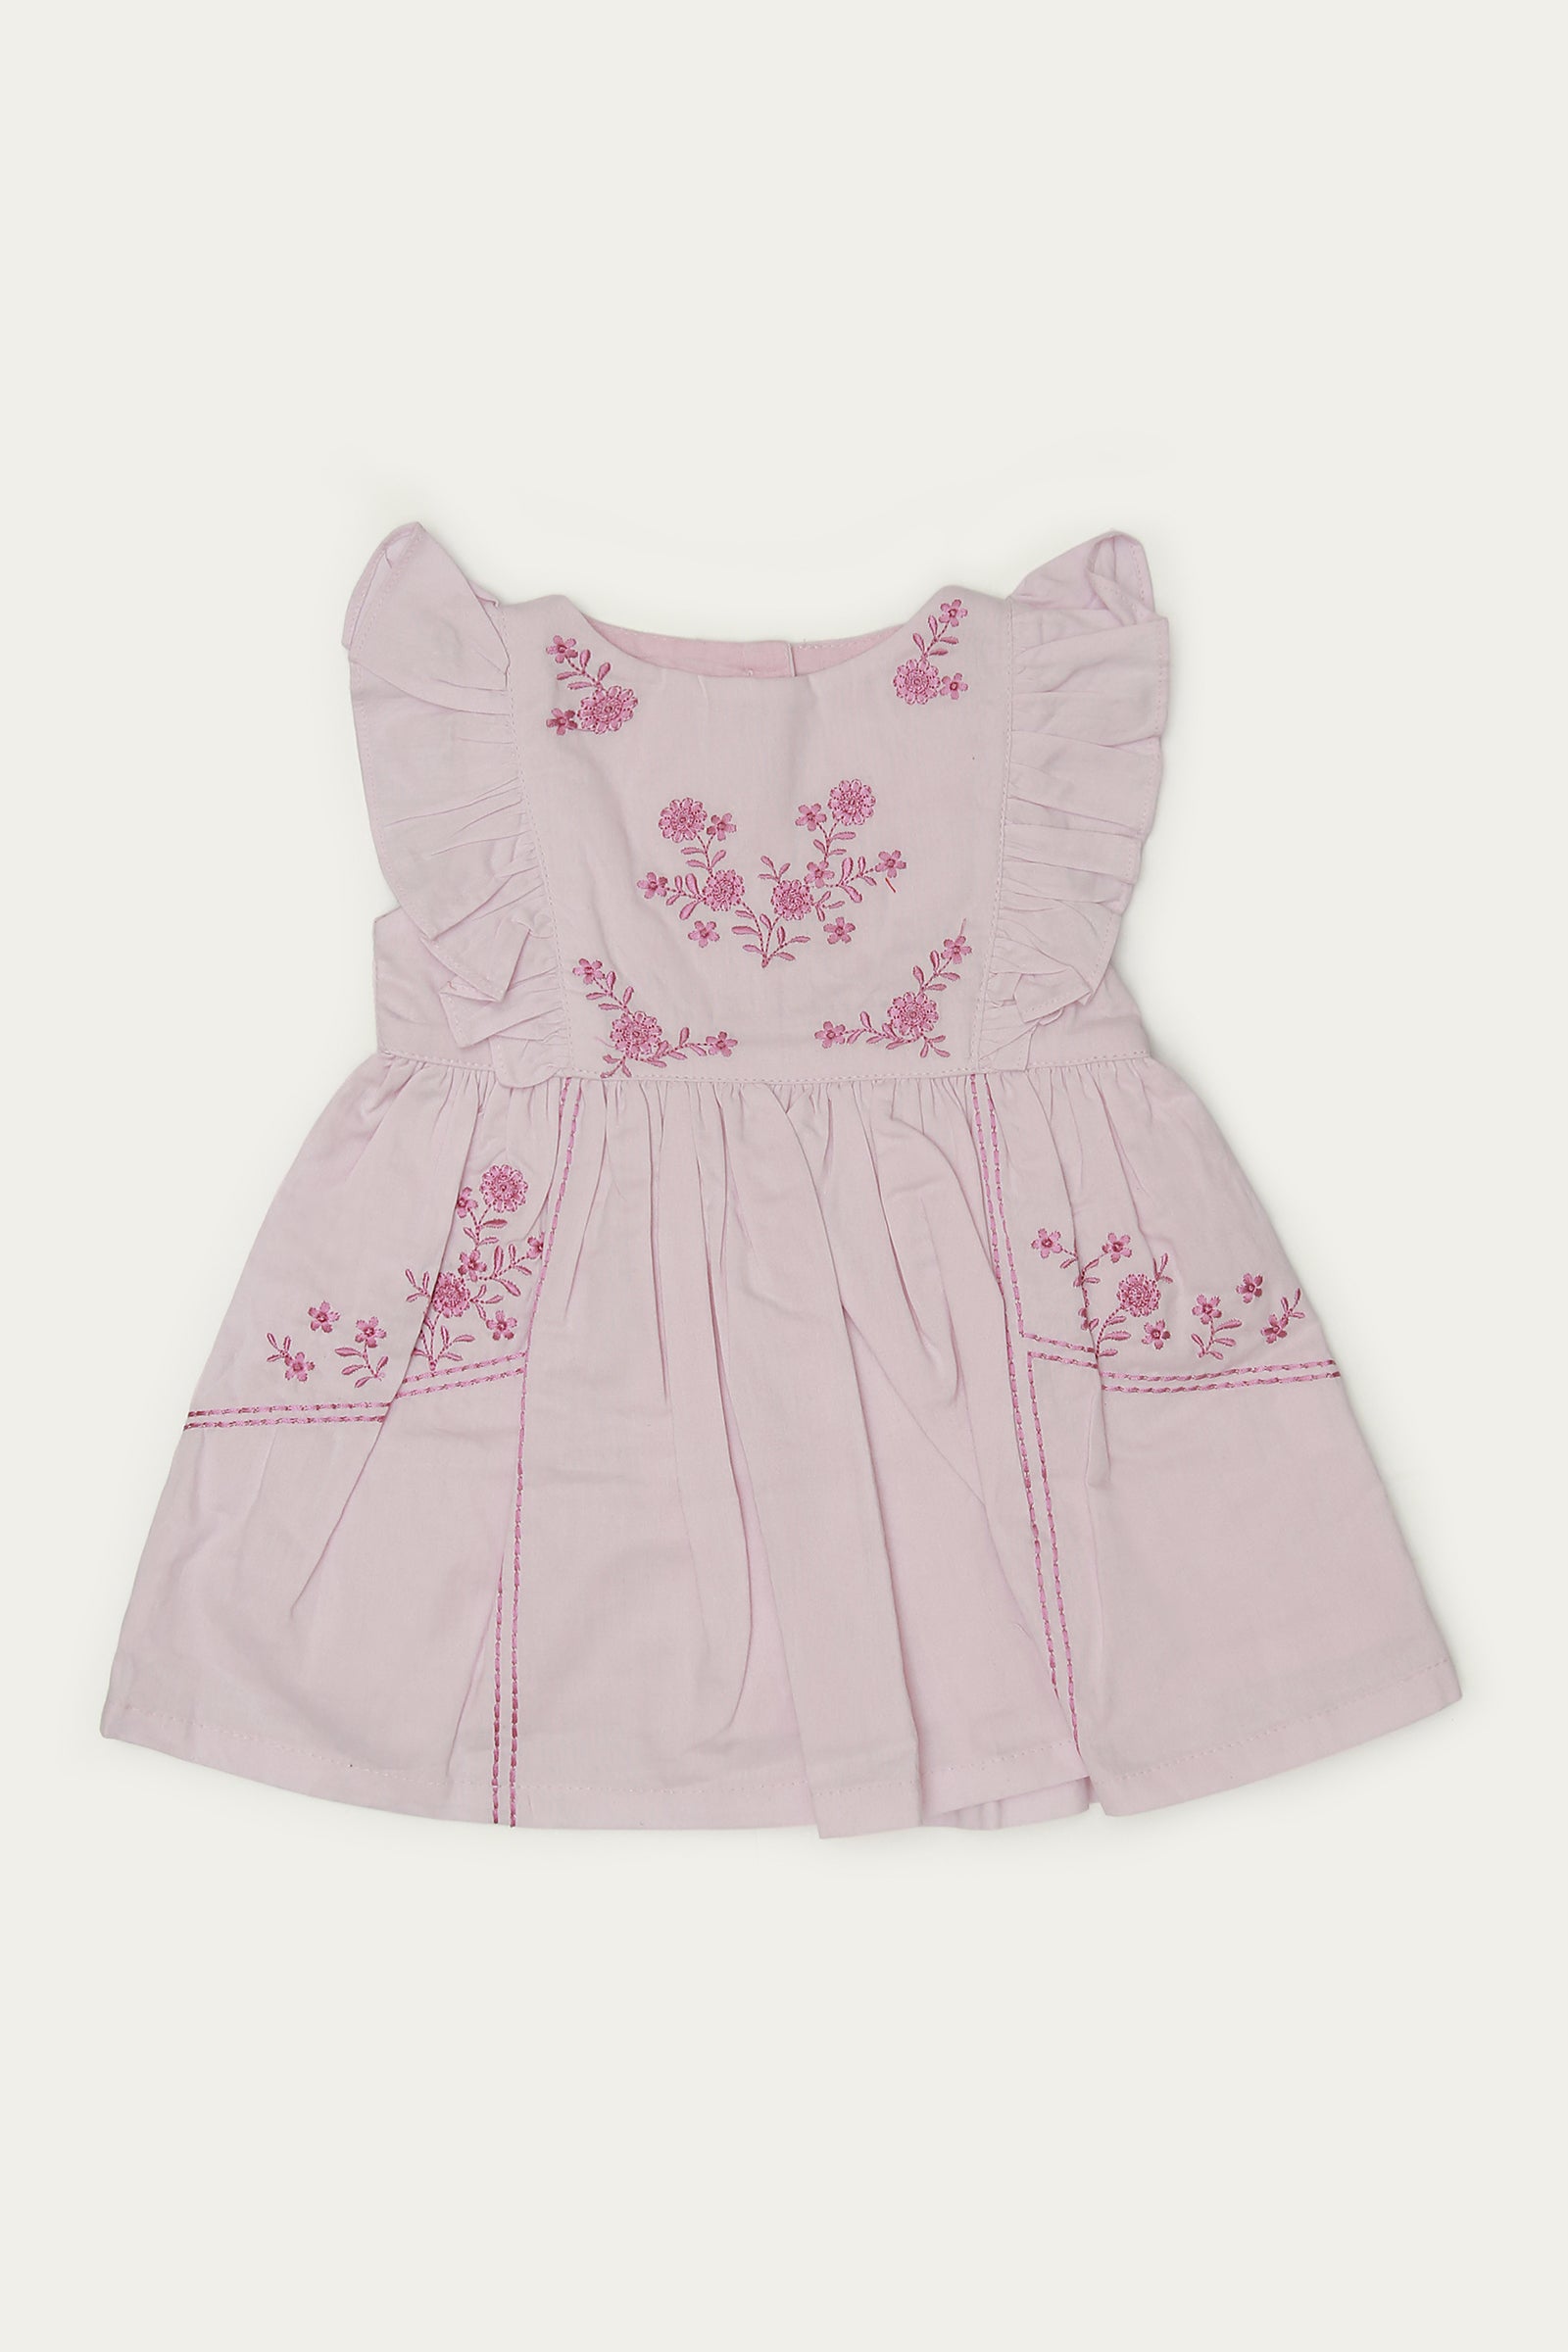 Embroidered Frock with Diaper Cover (IF-387)